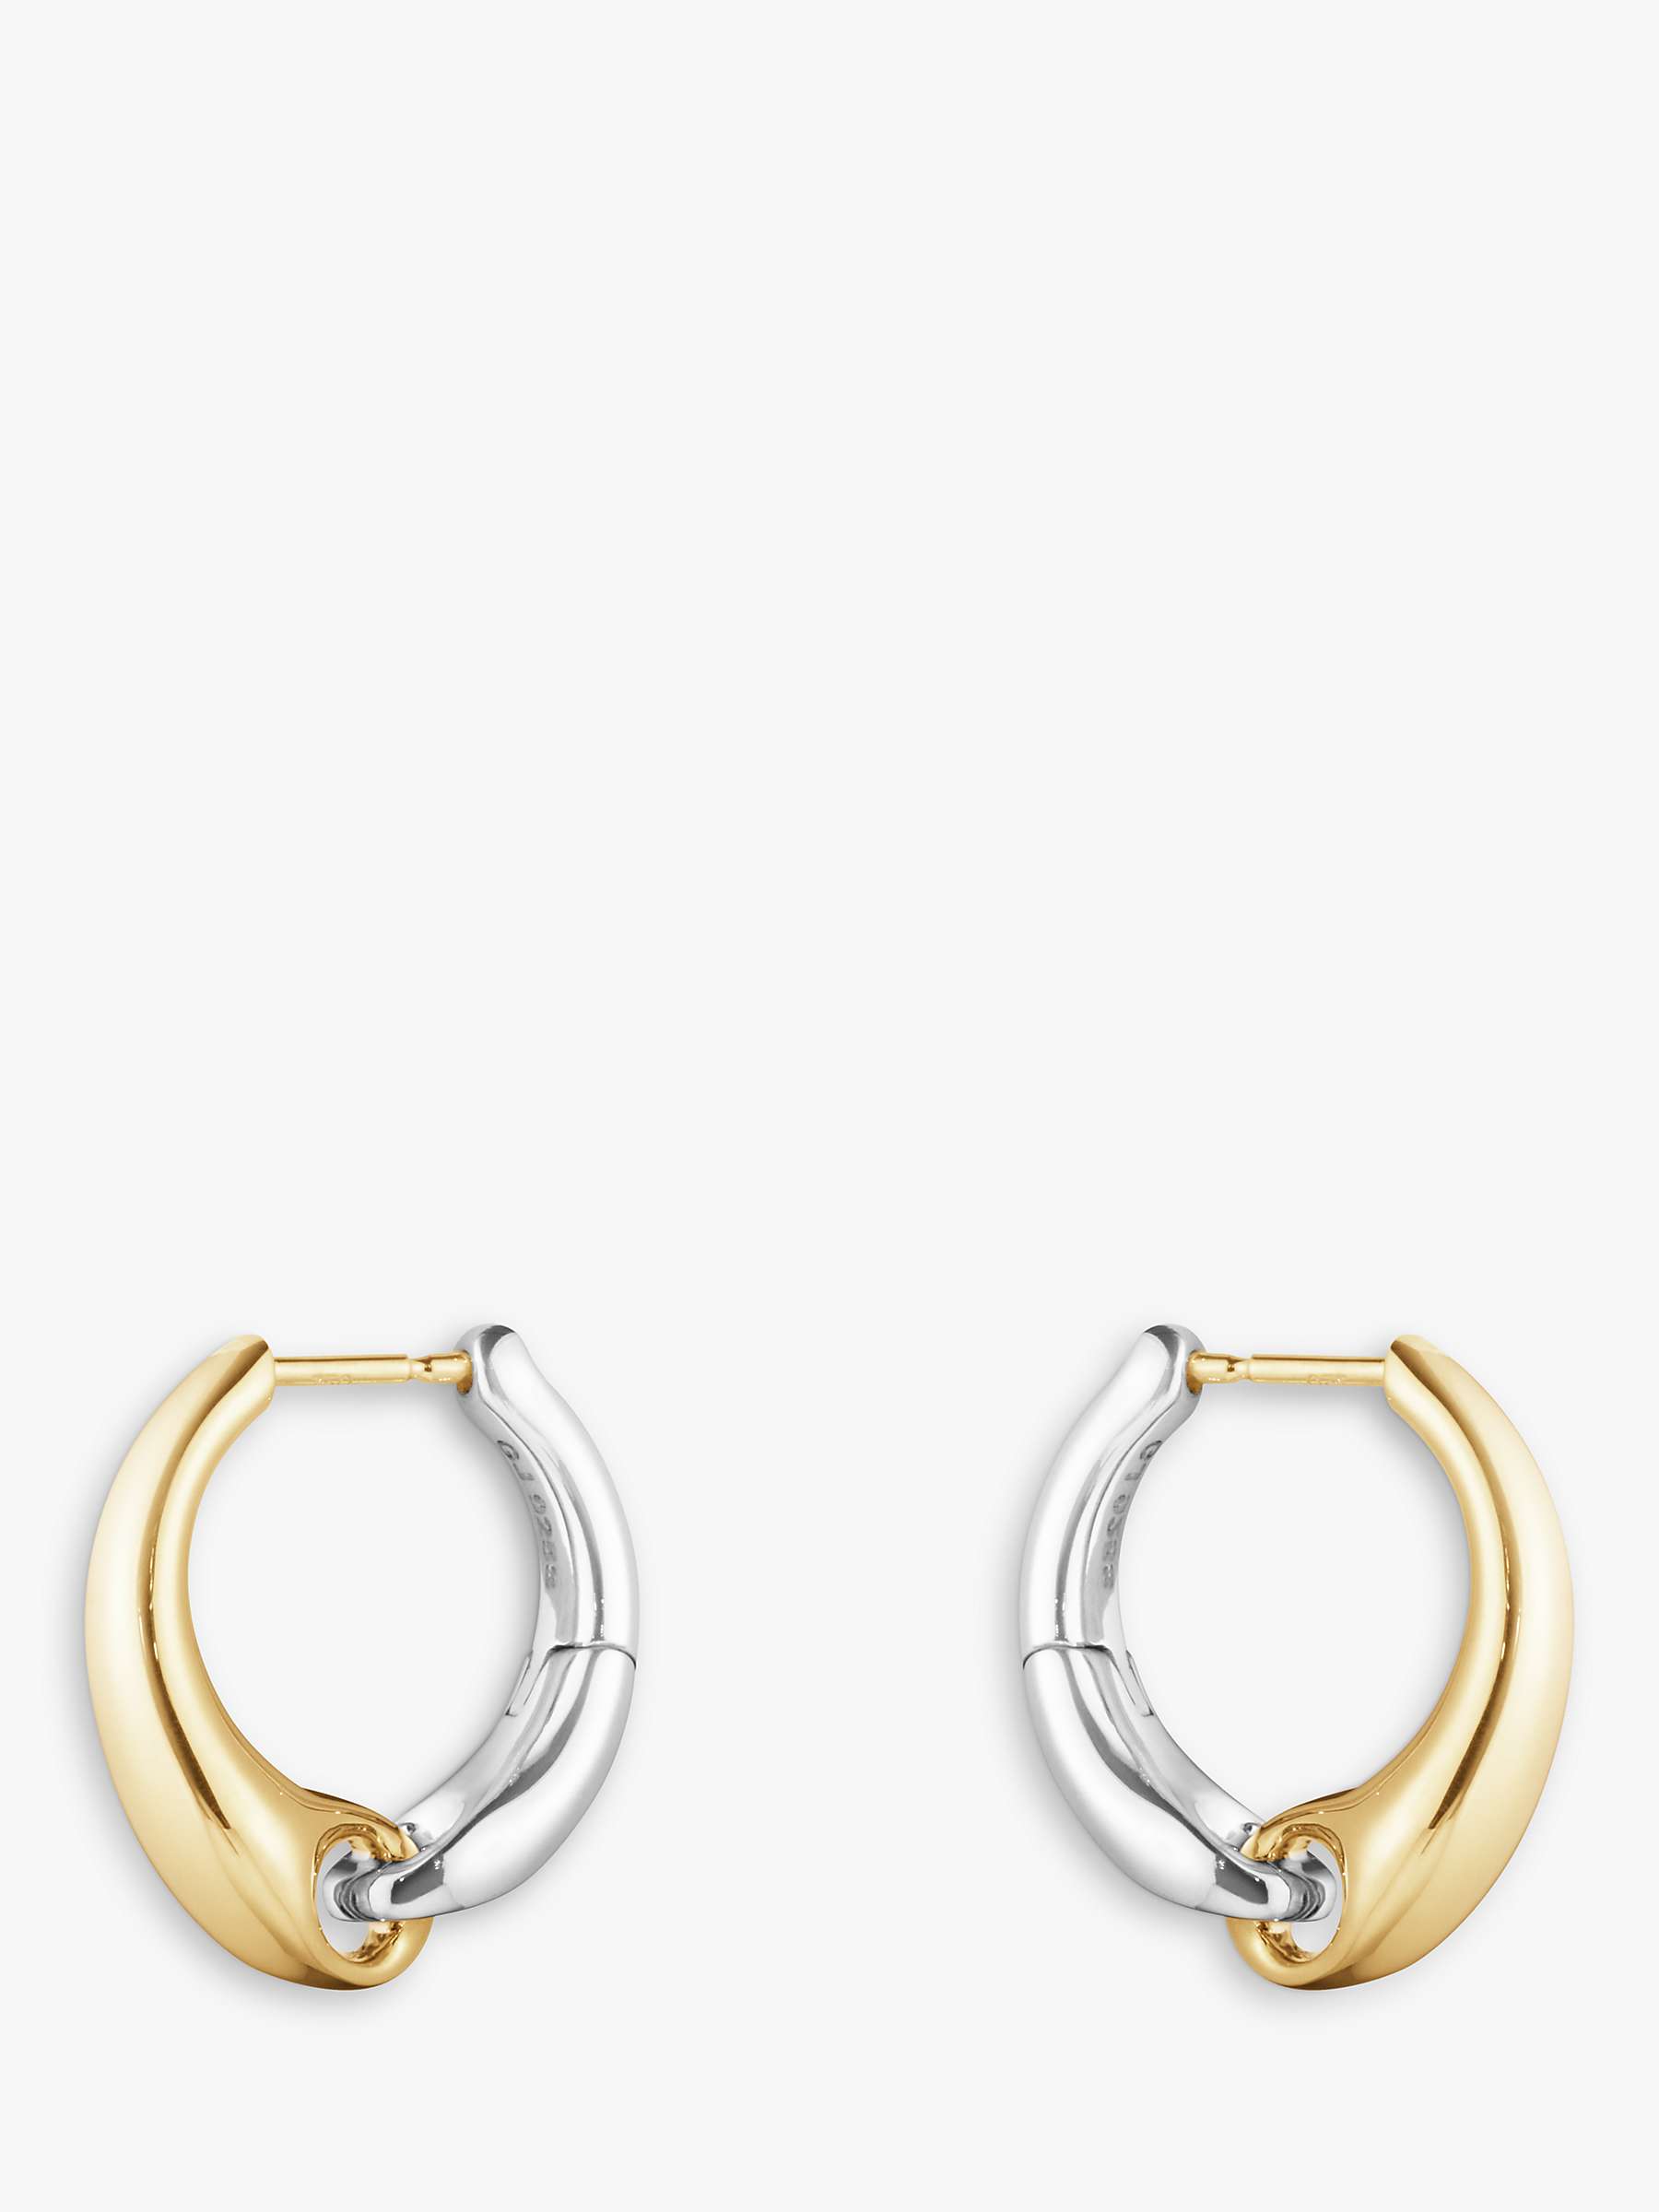 Buy Georg Jensen Organic Links 18ct Yellow Gold & Silver Two-Tone Hoop Earrings, Gold/Silver Online at johnlewis.com